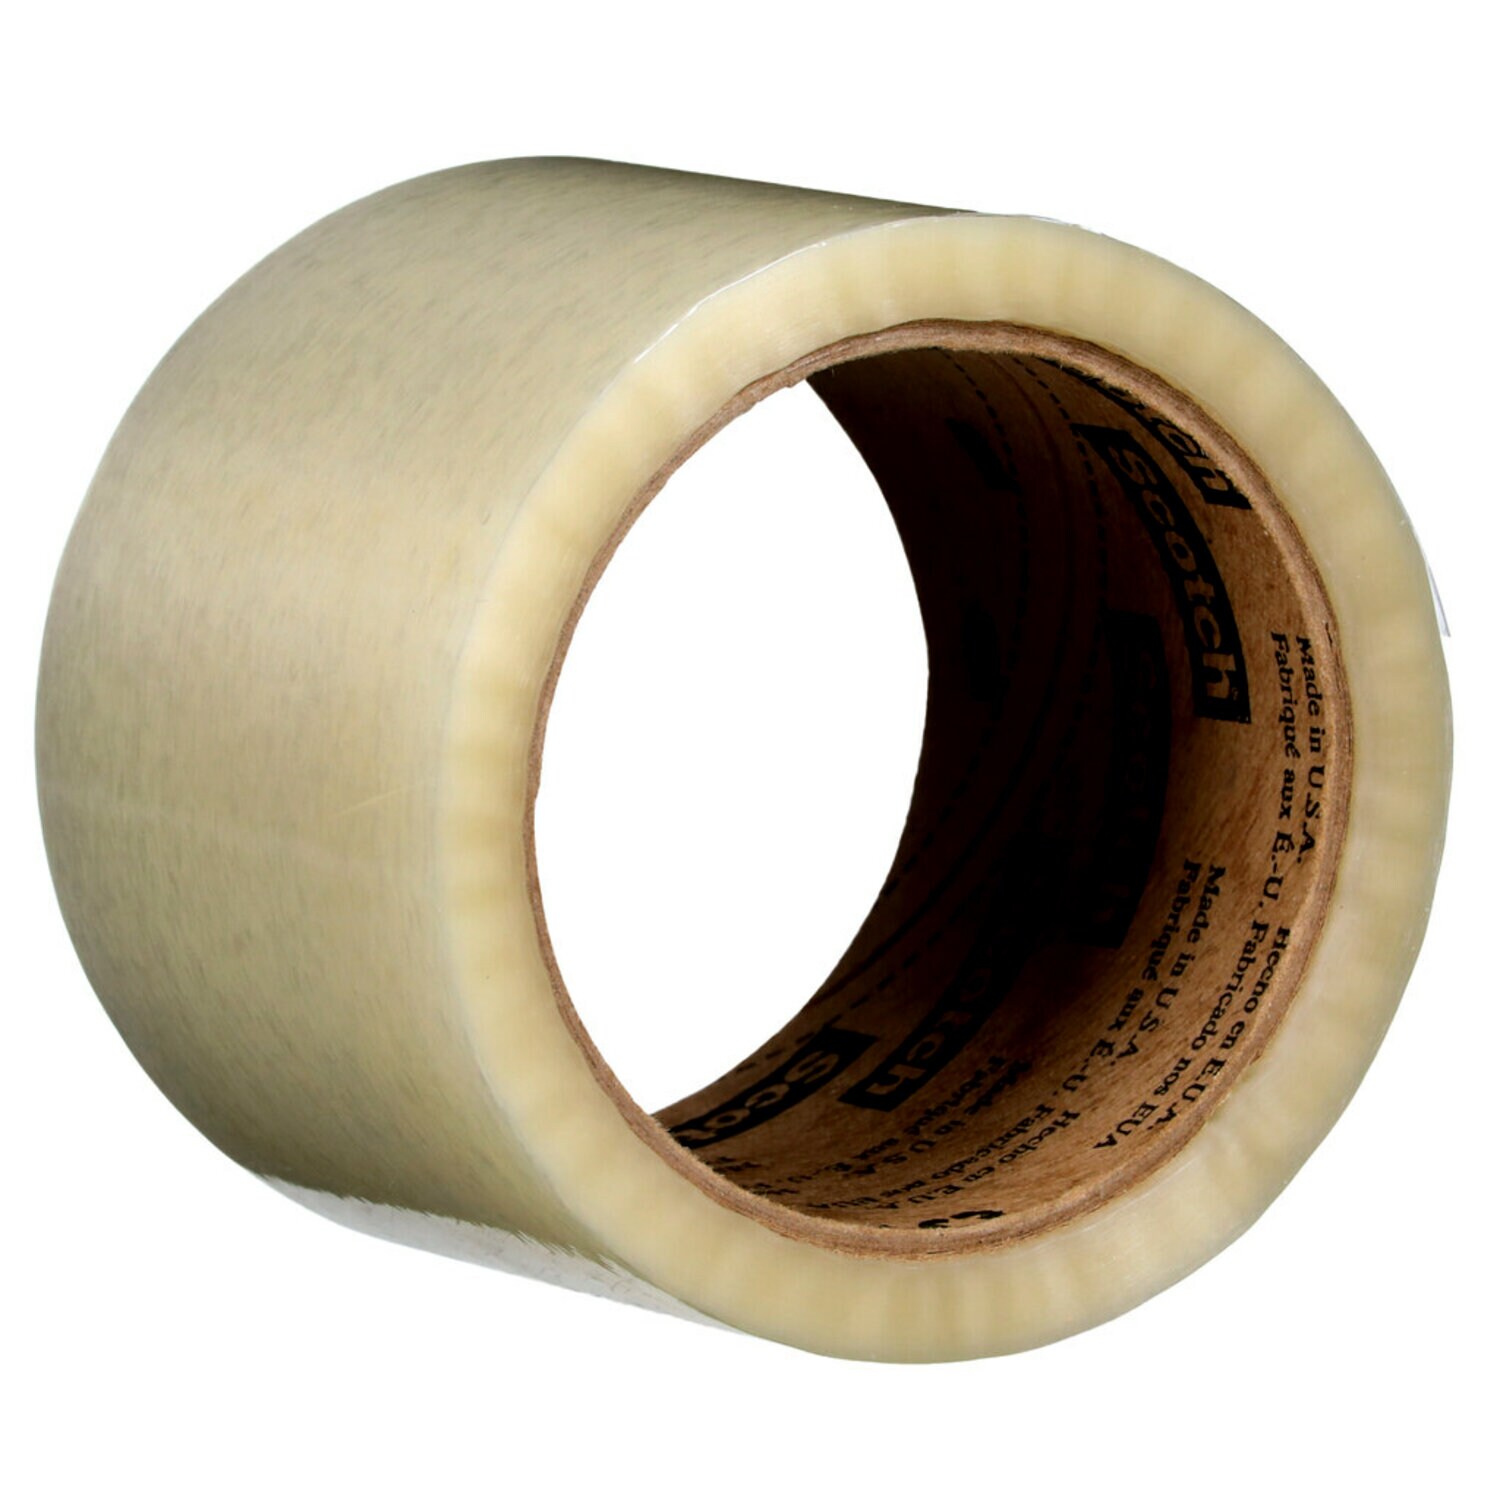 00051115688034, Scotch Box Sealing Tape 371, Clear, 72 mm x 50 m, 24 per  case (6 rolls/pack 4 packs/case), Conveniently Packaged, Aircraft products, box-sealing-tapes